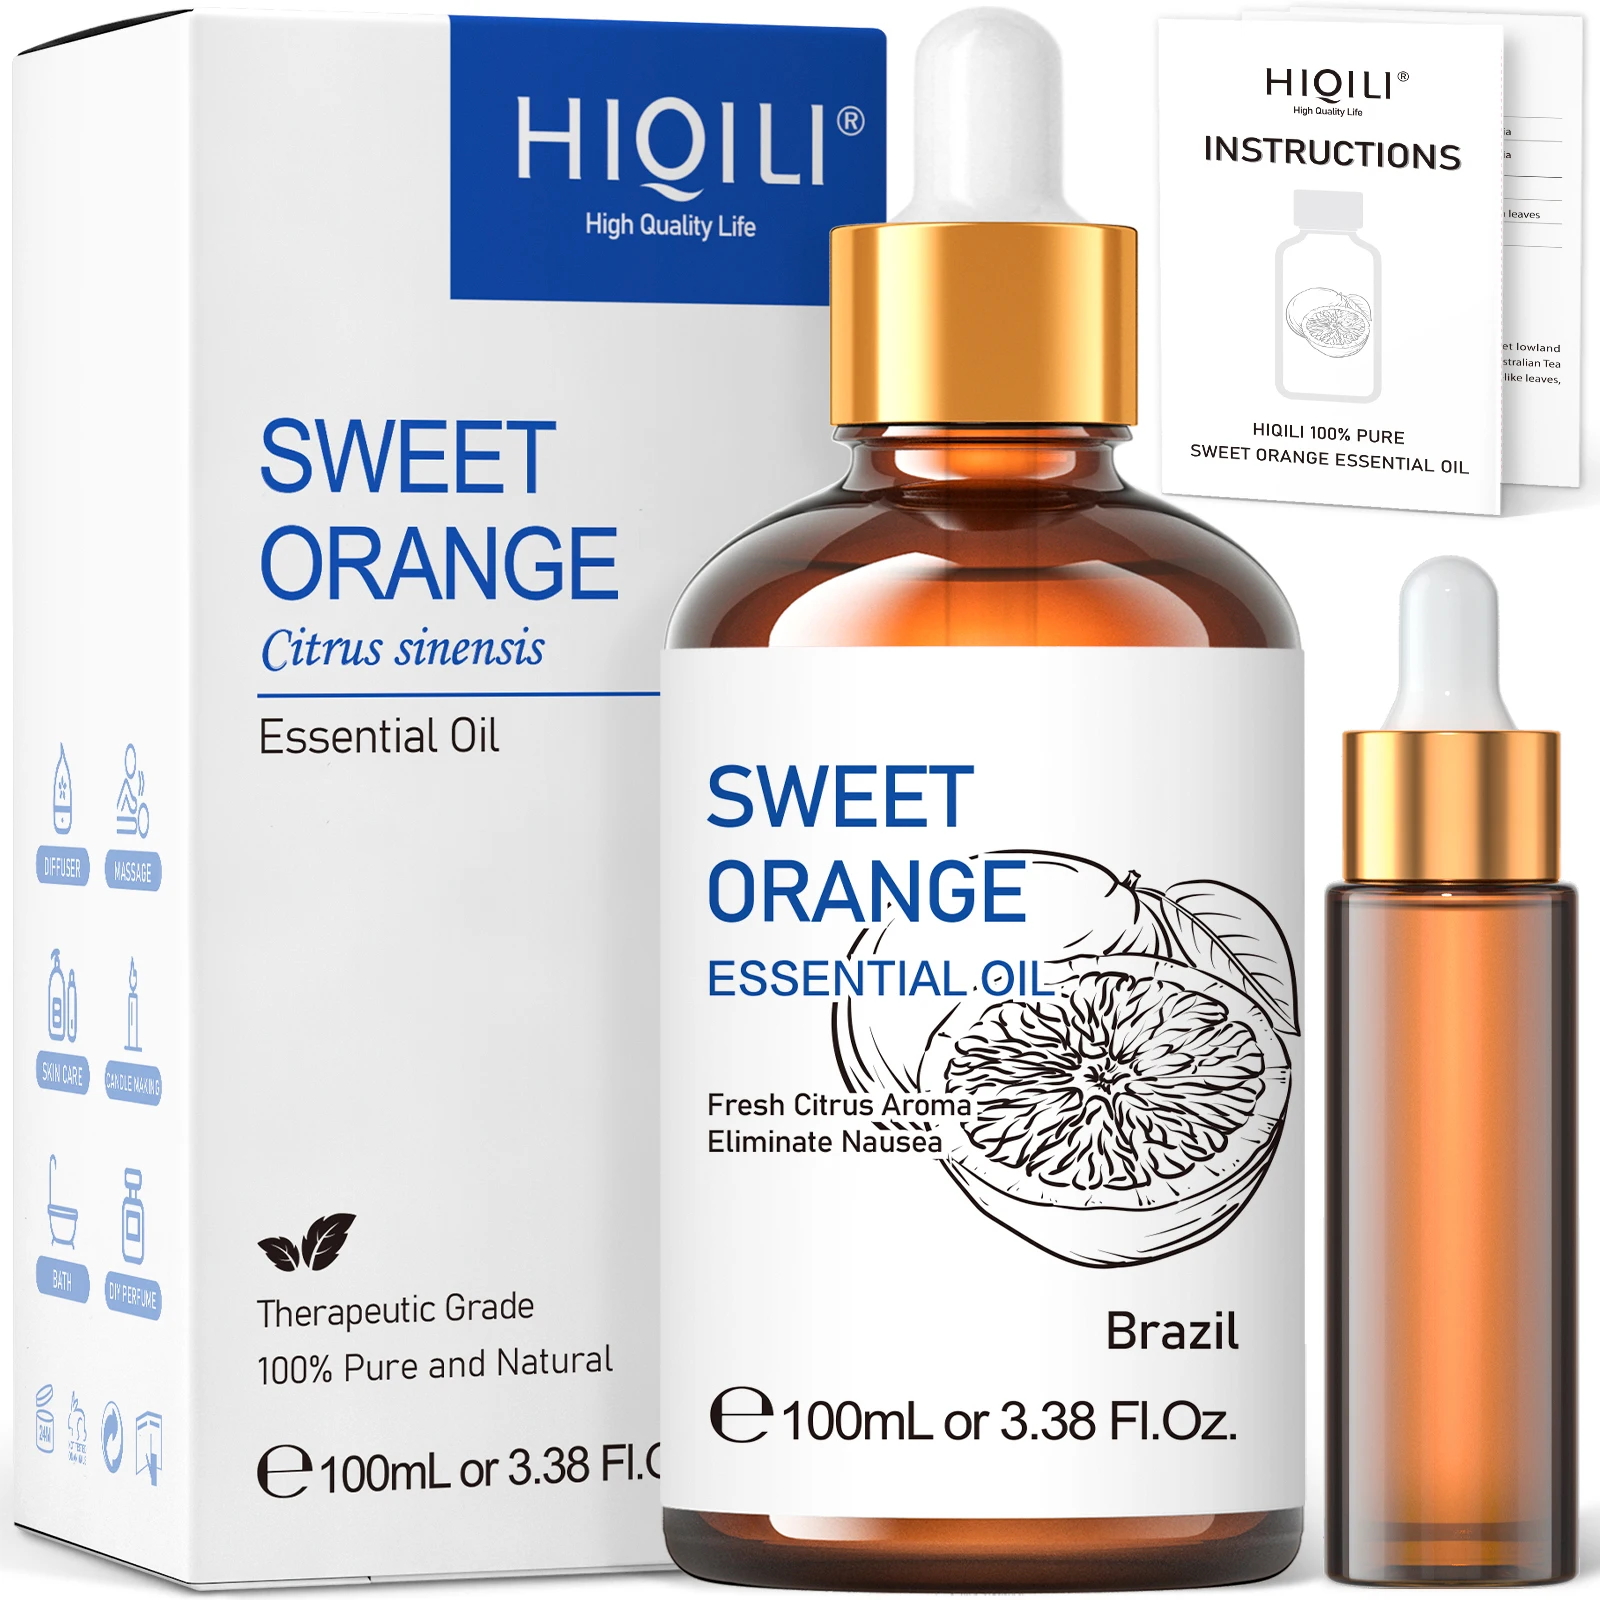 HIQILI 100ML Sweet Orange Essential Oils,100% Pure Nature for Aromatherapy, Diffuser, Humidifier, Massage, Fresh air, Candle